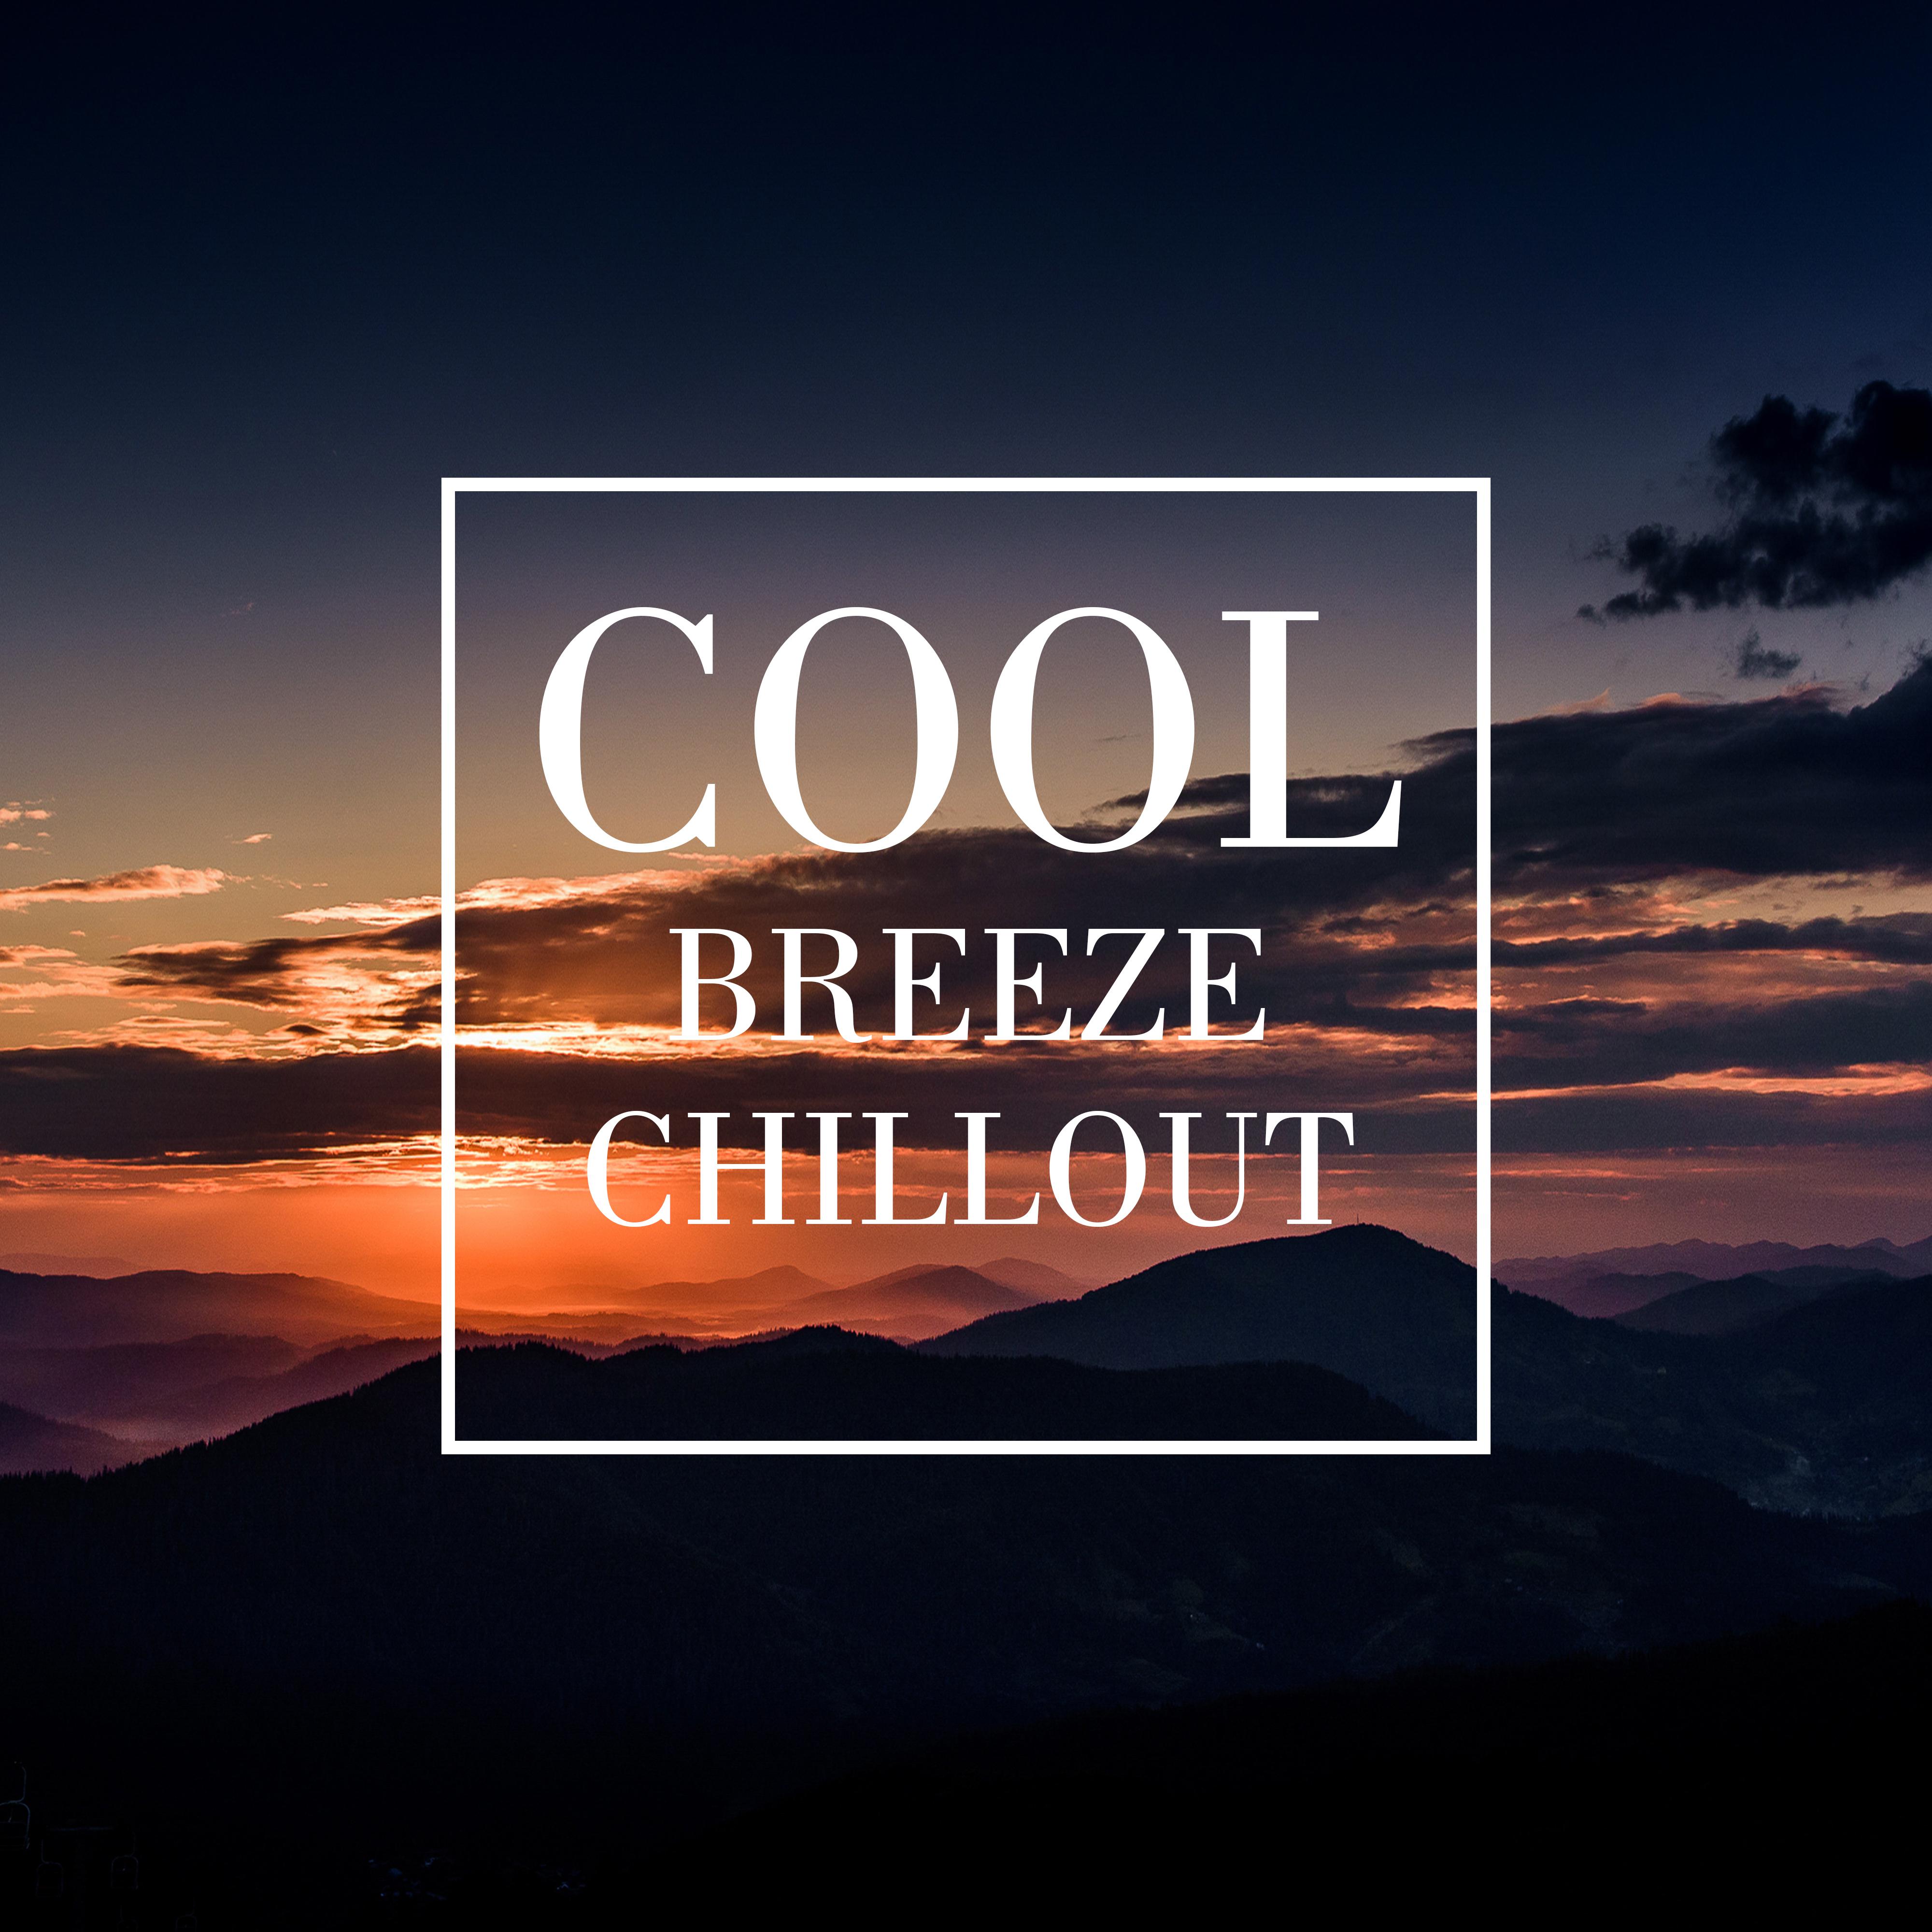 Cool Breeze Chillout